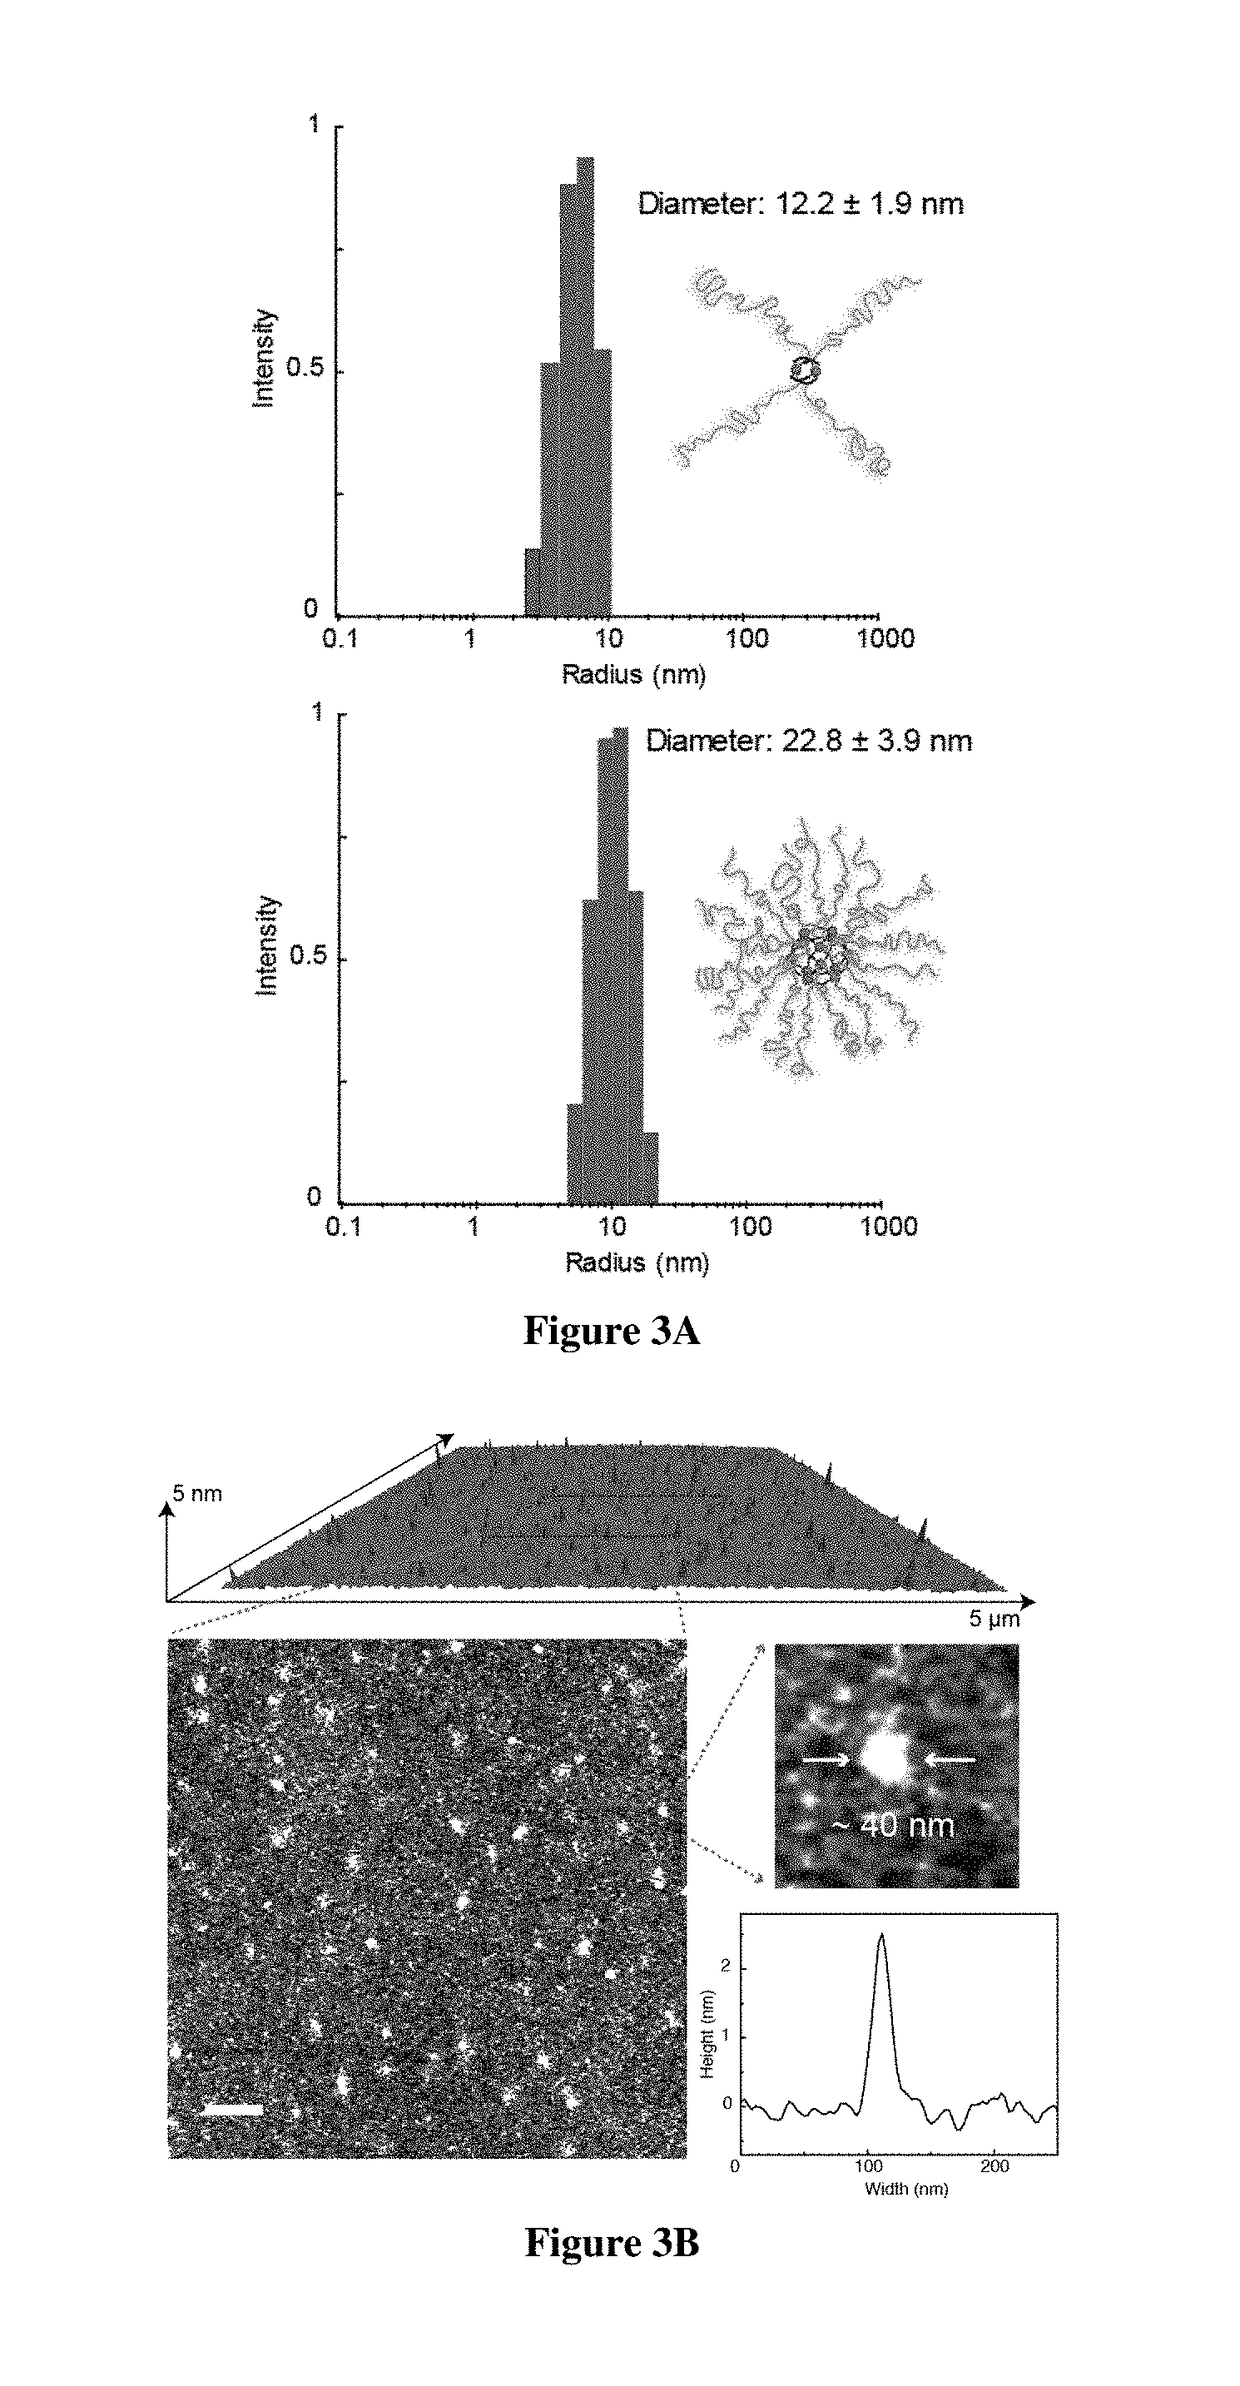 Block co-poly(metal organic nanostructures) (bcpmons) and uses thereof